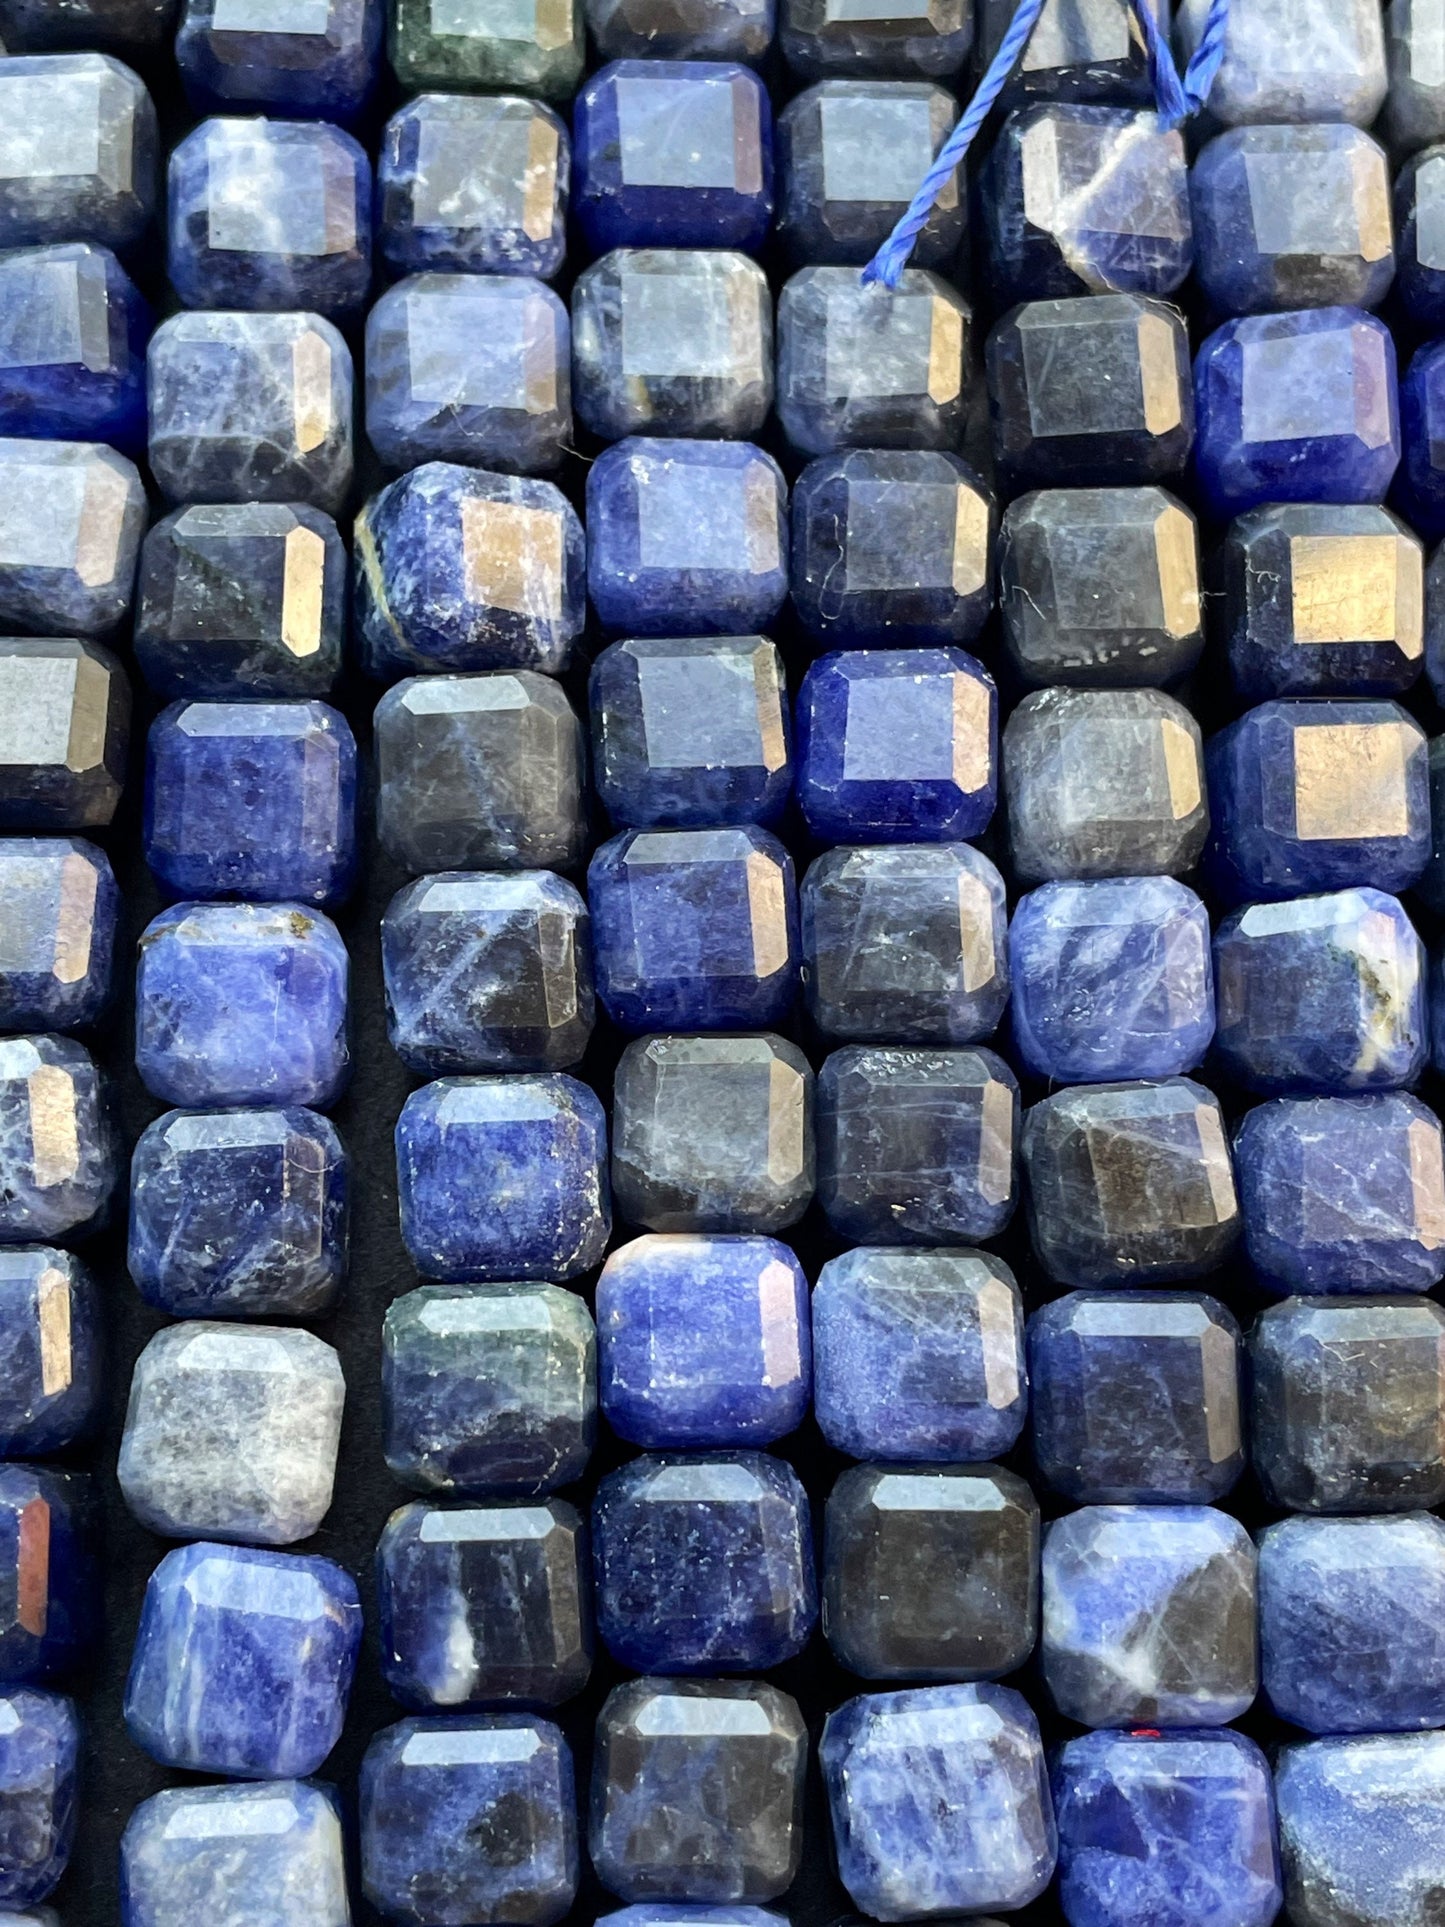 AAA Natural Sodalite Gemstone Bead Faceted 8mm Cube Shape, Beautiful Natural Blue Color Sodalite Gemstone Bead 15.5"